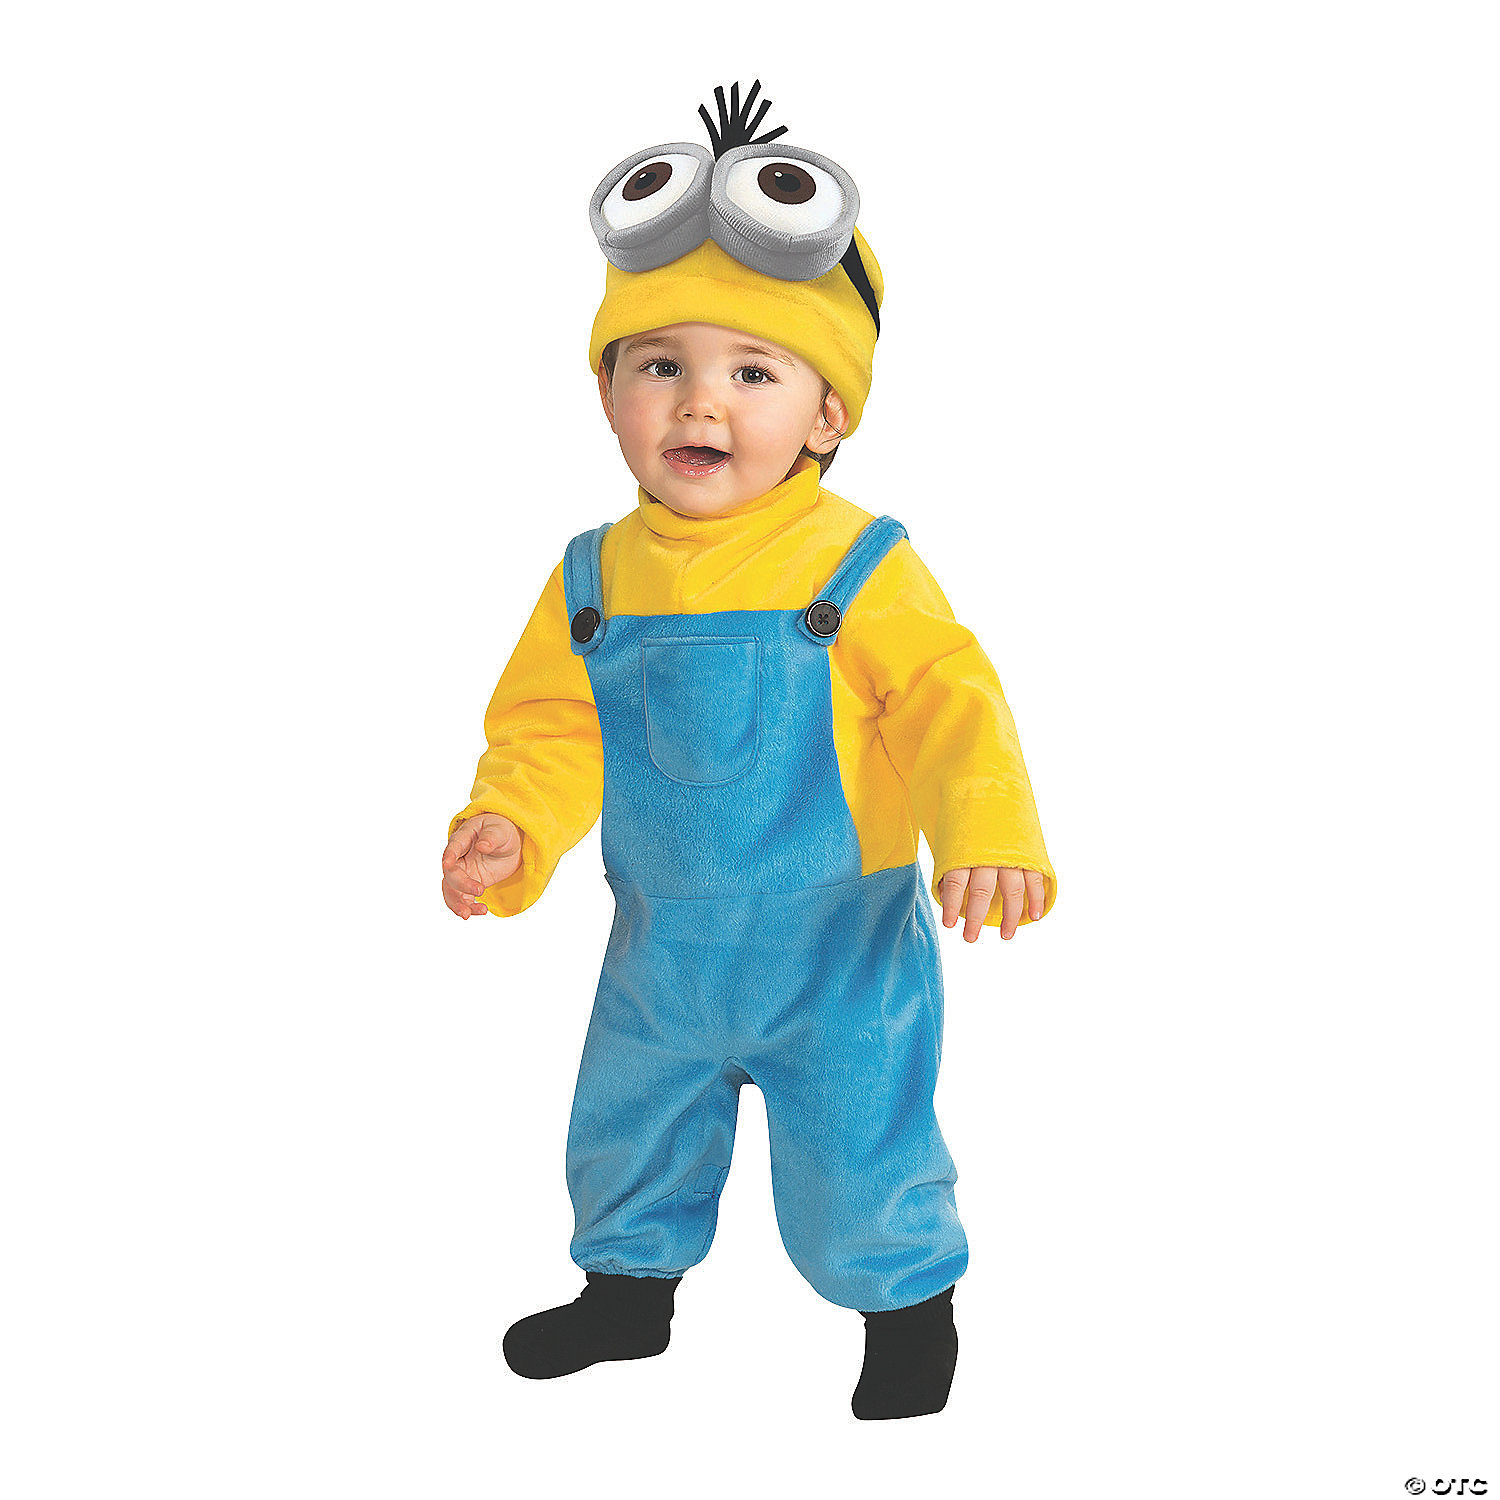  Party City Minion Halloween Costume for Women, Minions